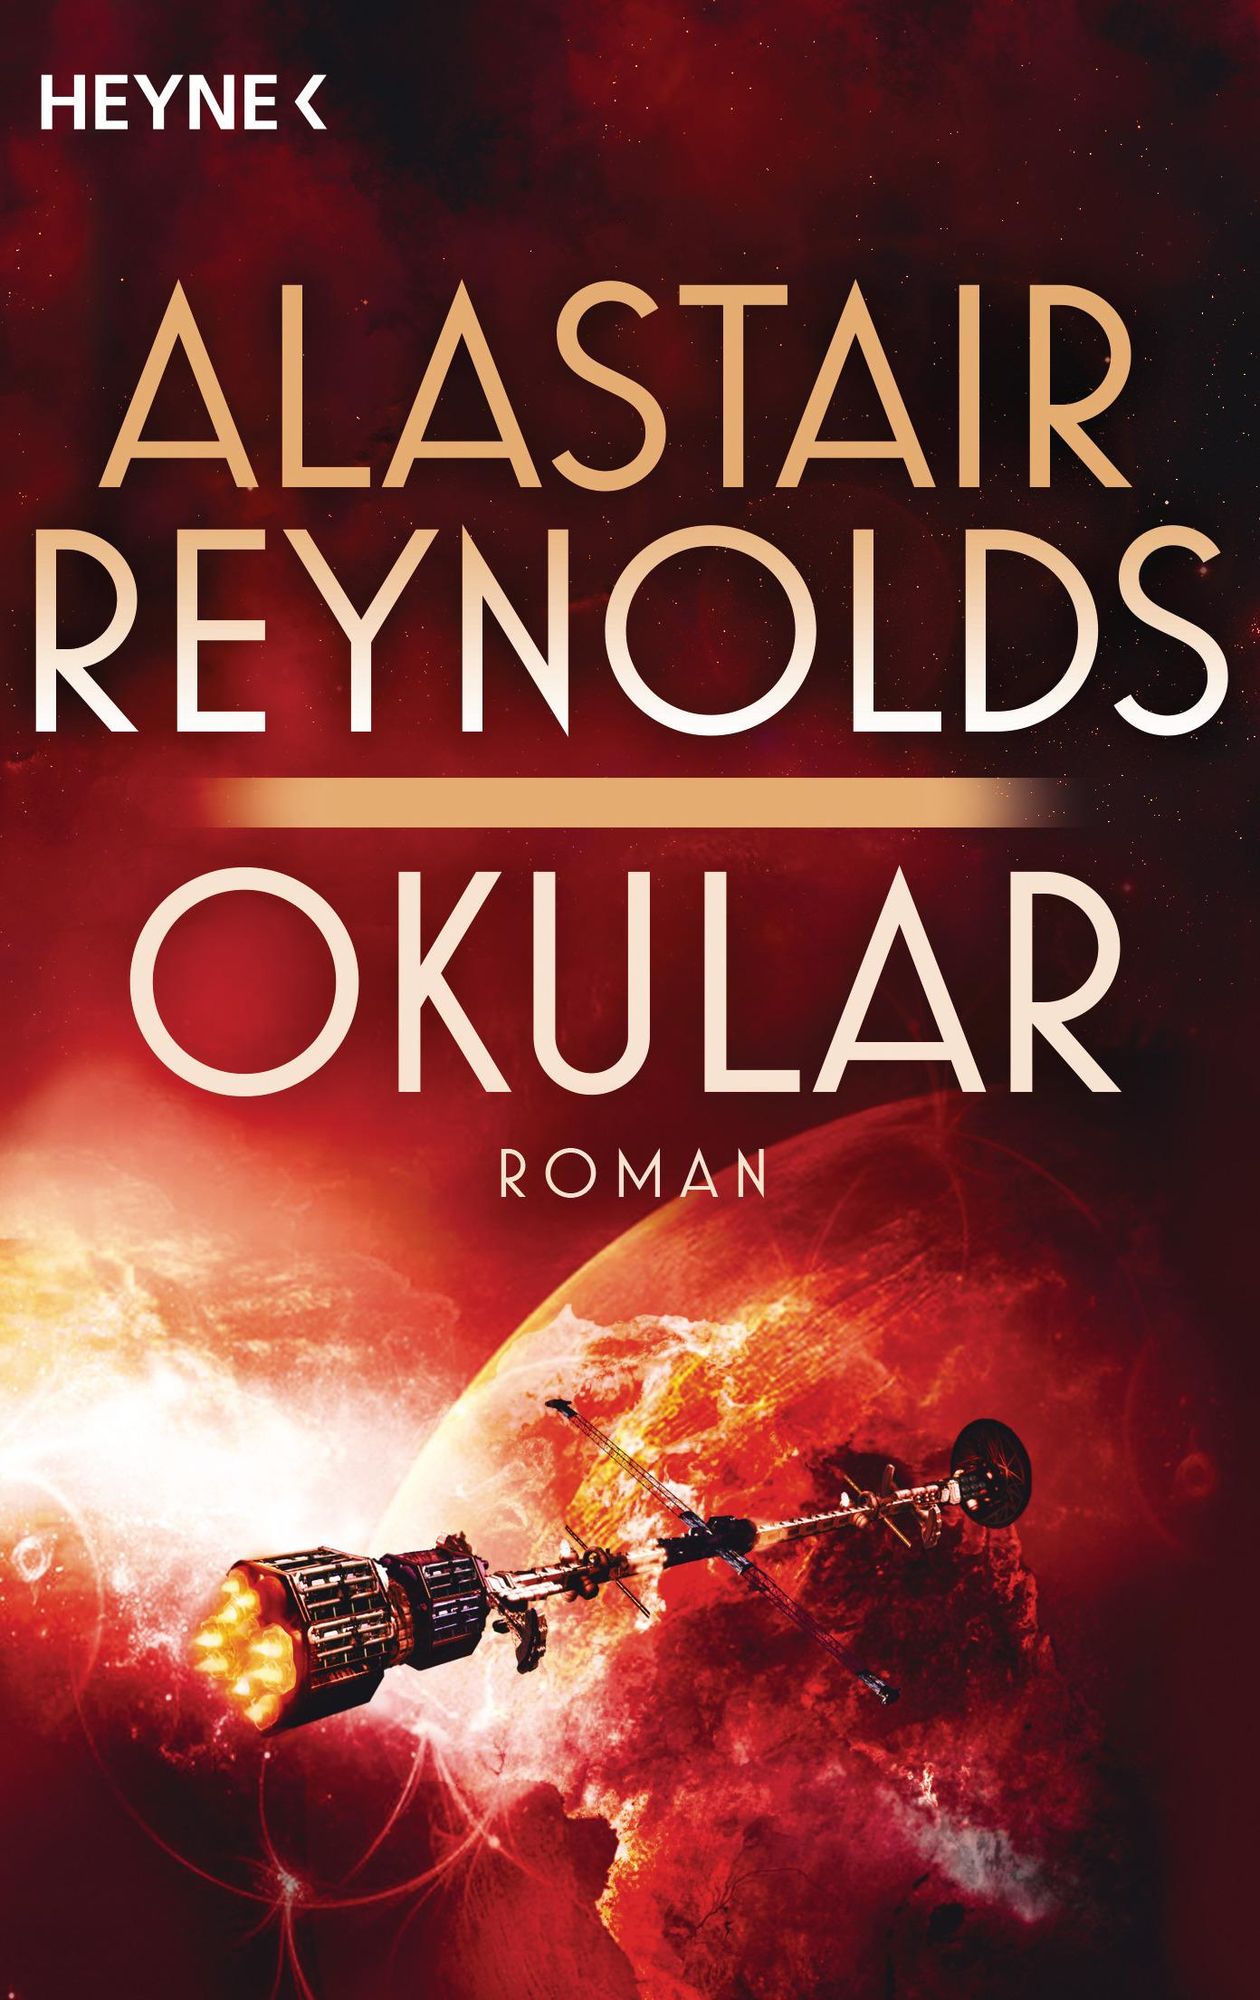 Blue Remembered Earth (Poseidon's Children, #1) by Alastair Reynolds